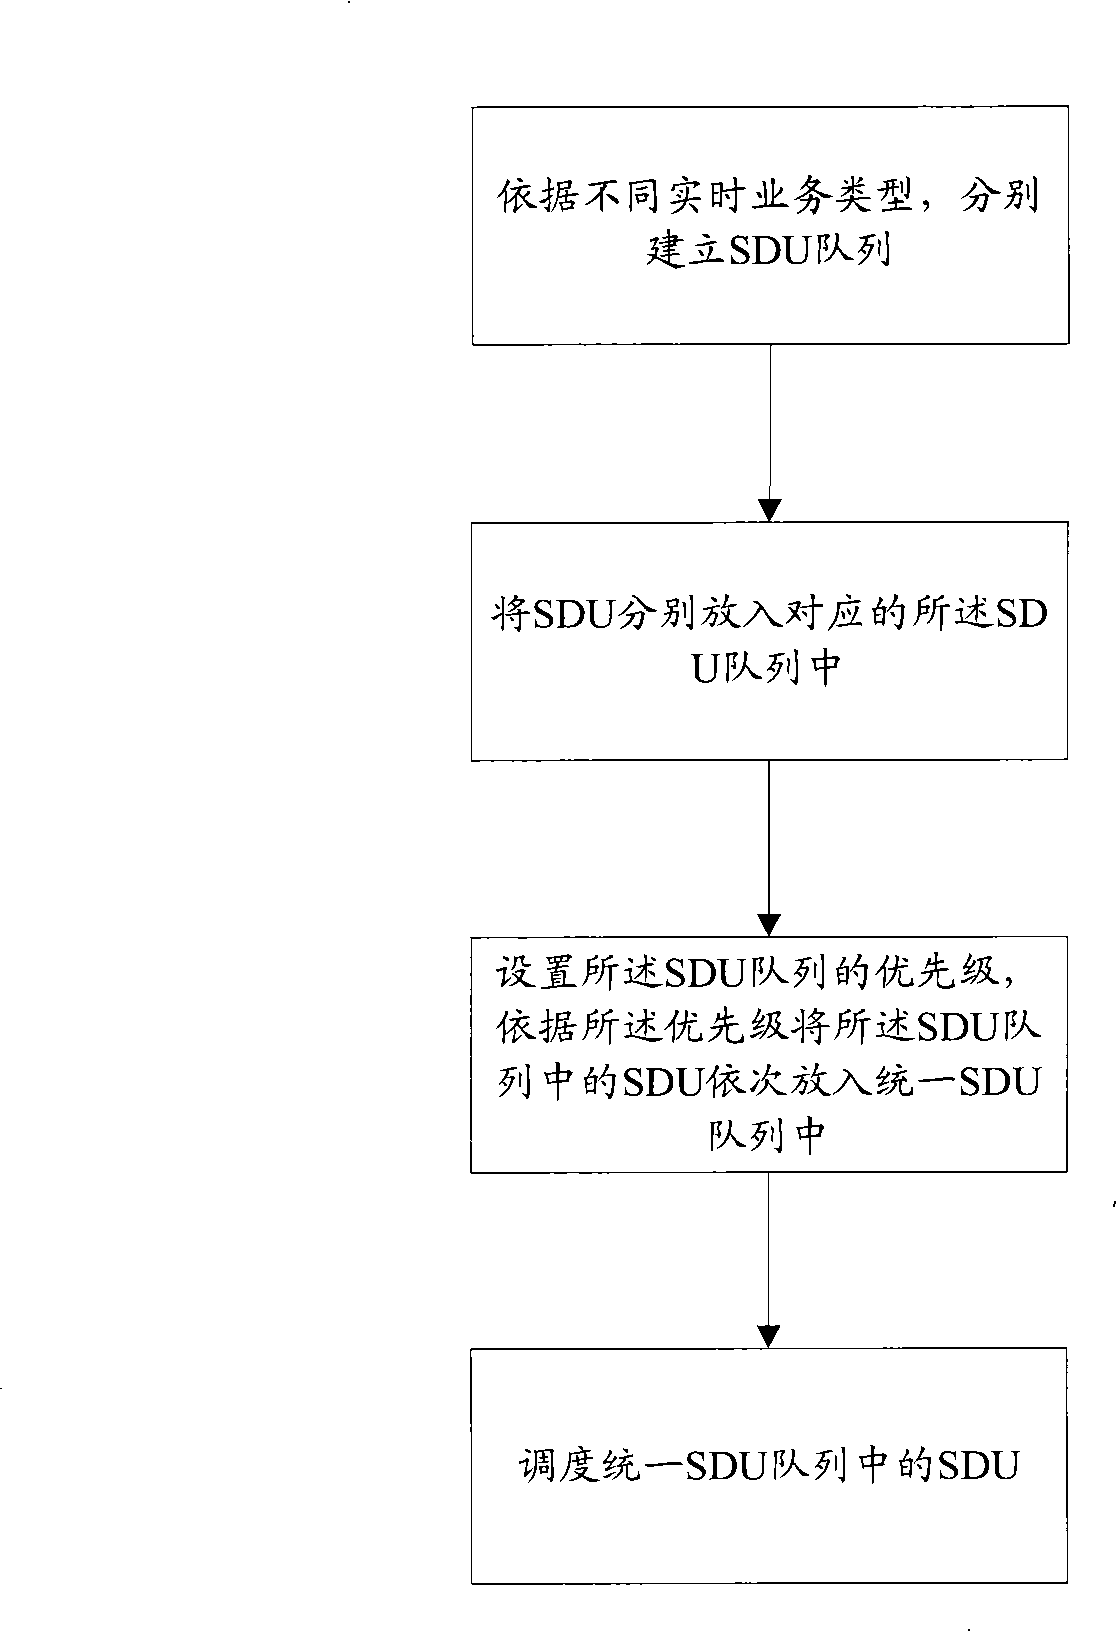 Scheduling apparatus and method for real-time service